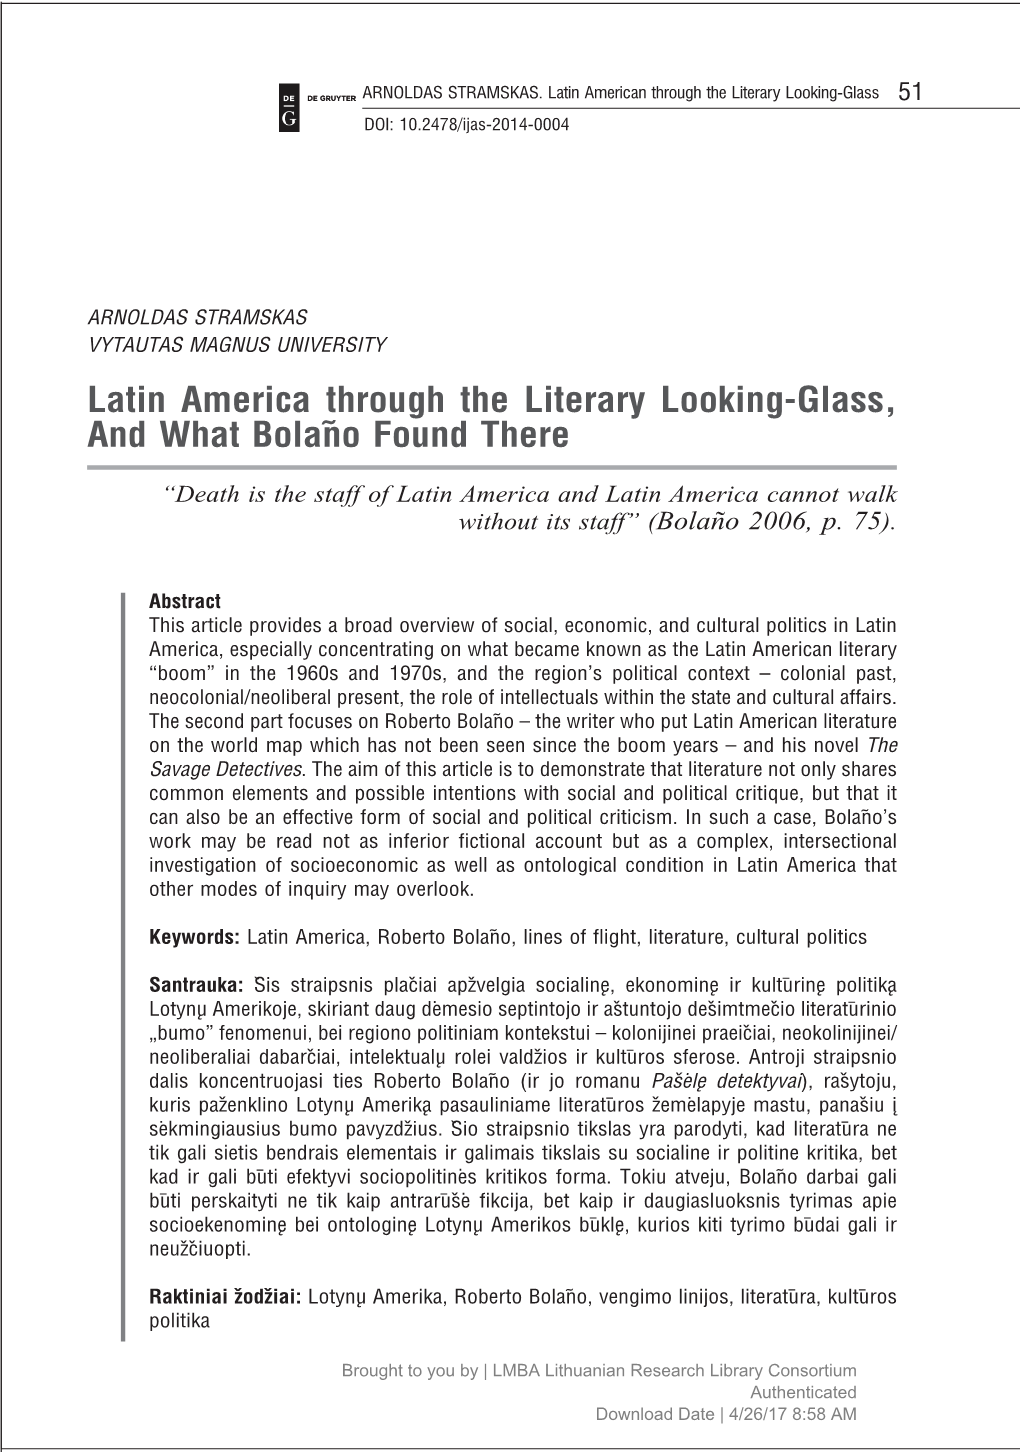 Latin America Through the Literary Looking-Glass, and What Bolaño Found There